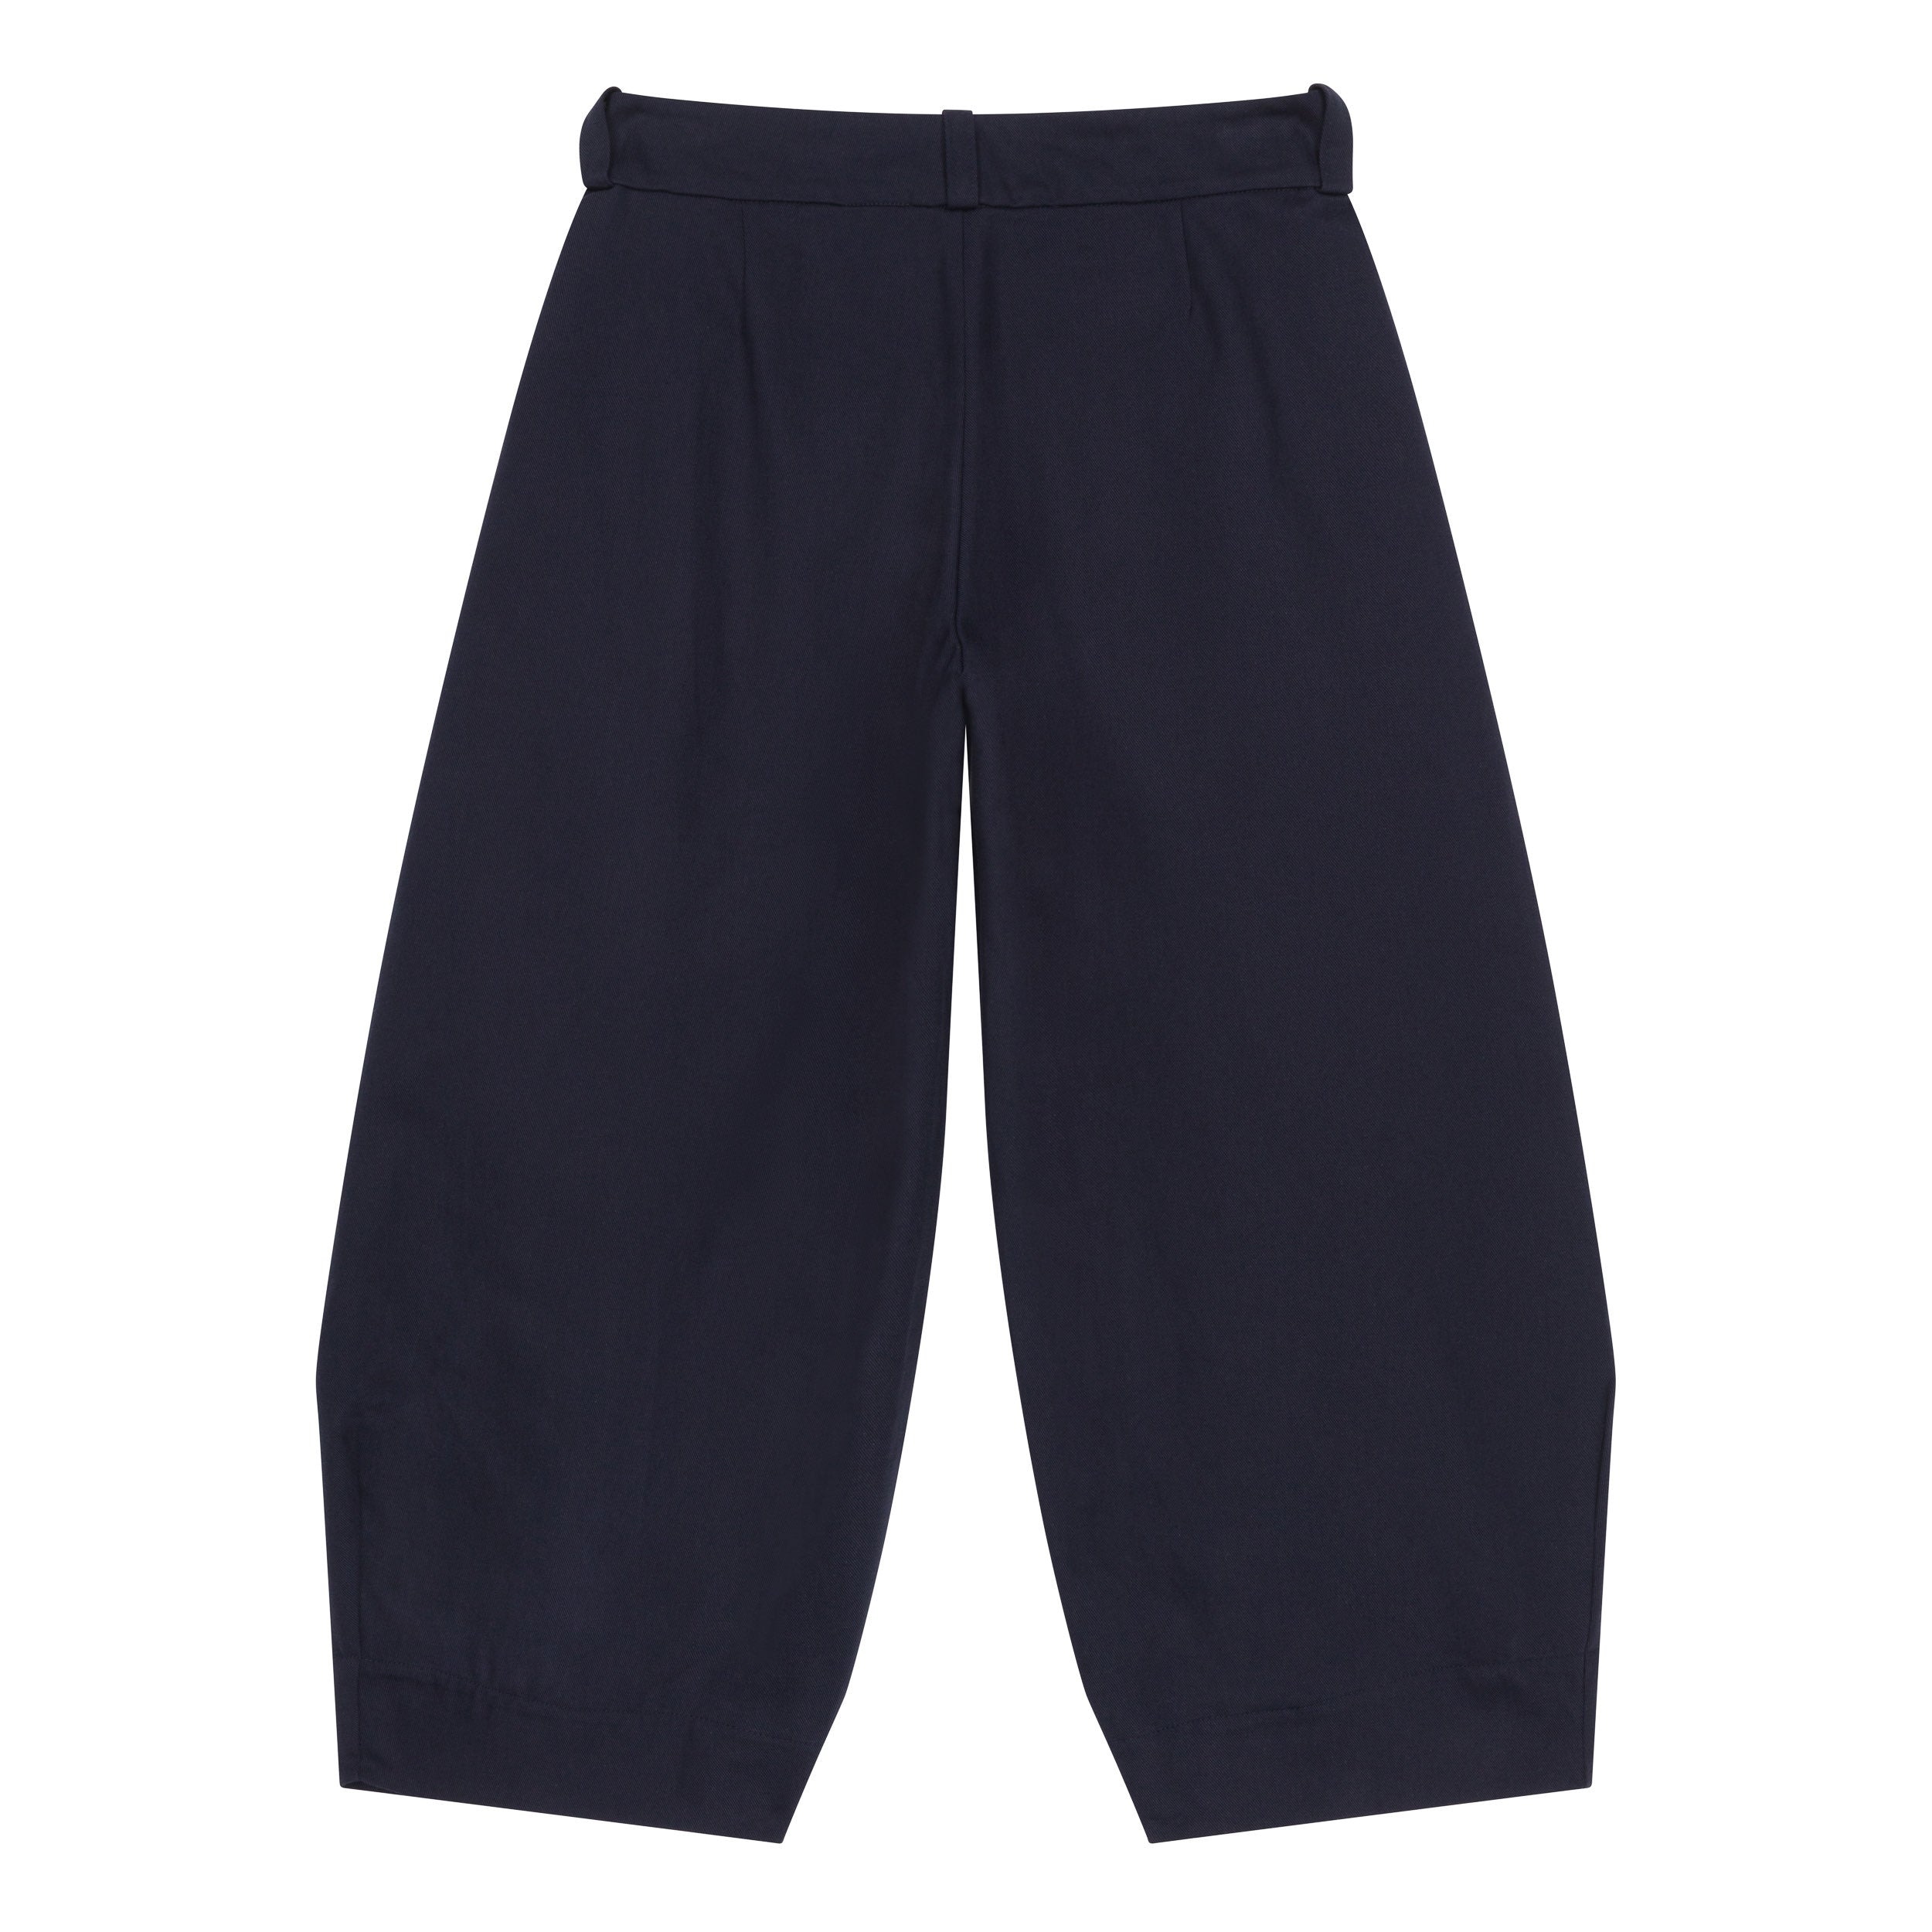 Carrier Company Dutch trouser In Navy Cotton Drill